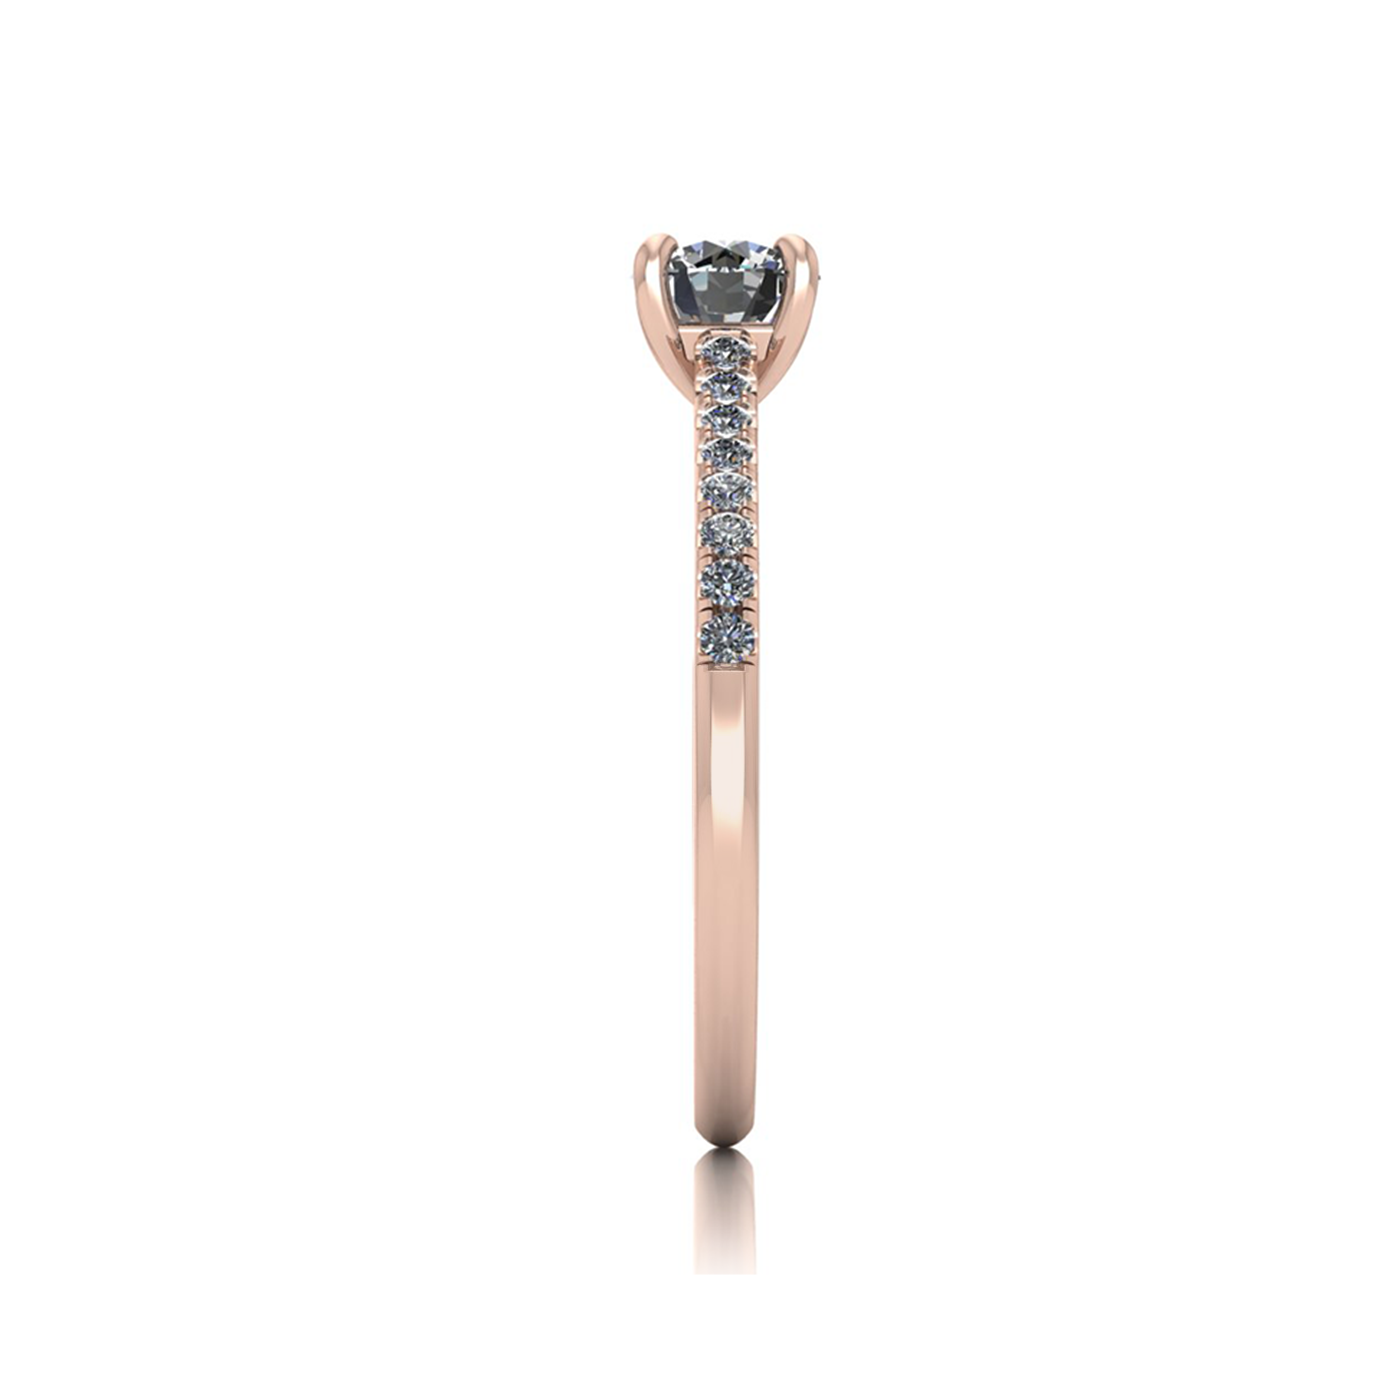 18k rose gold 0,50 ct 4 prongs round cut diamond engagement ring with whisper thin pavÉ set band